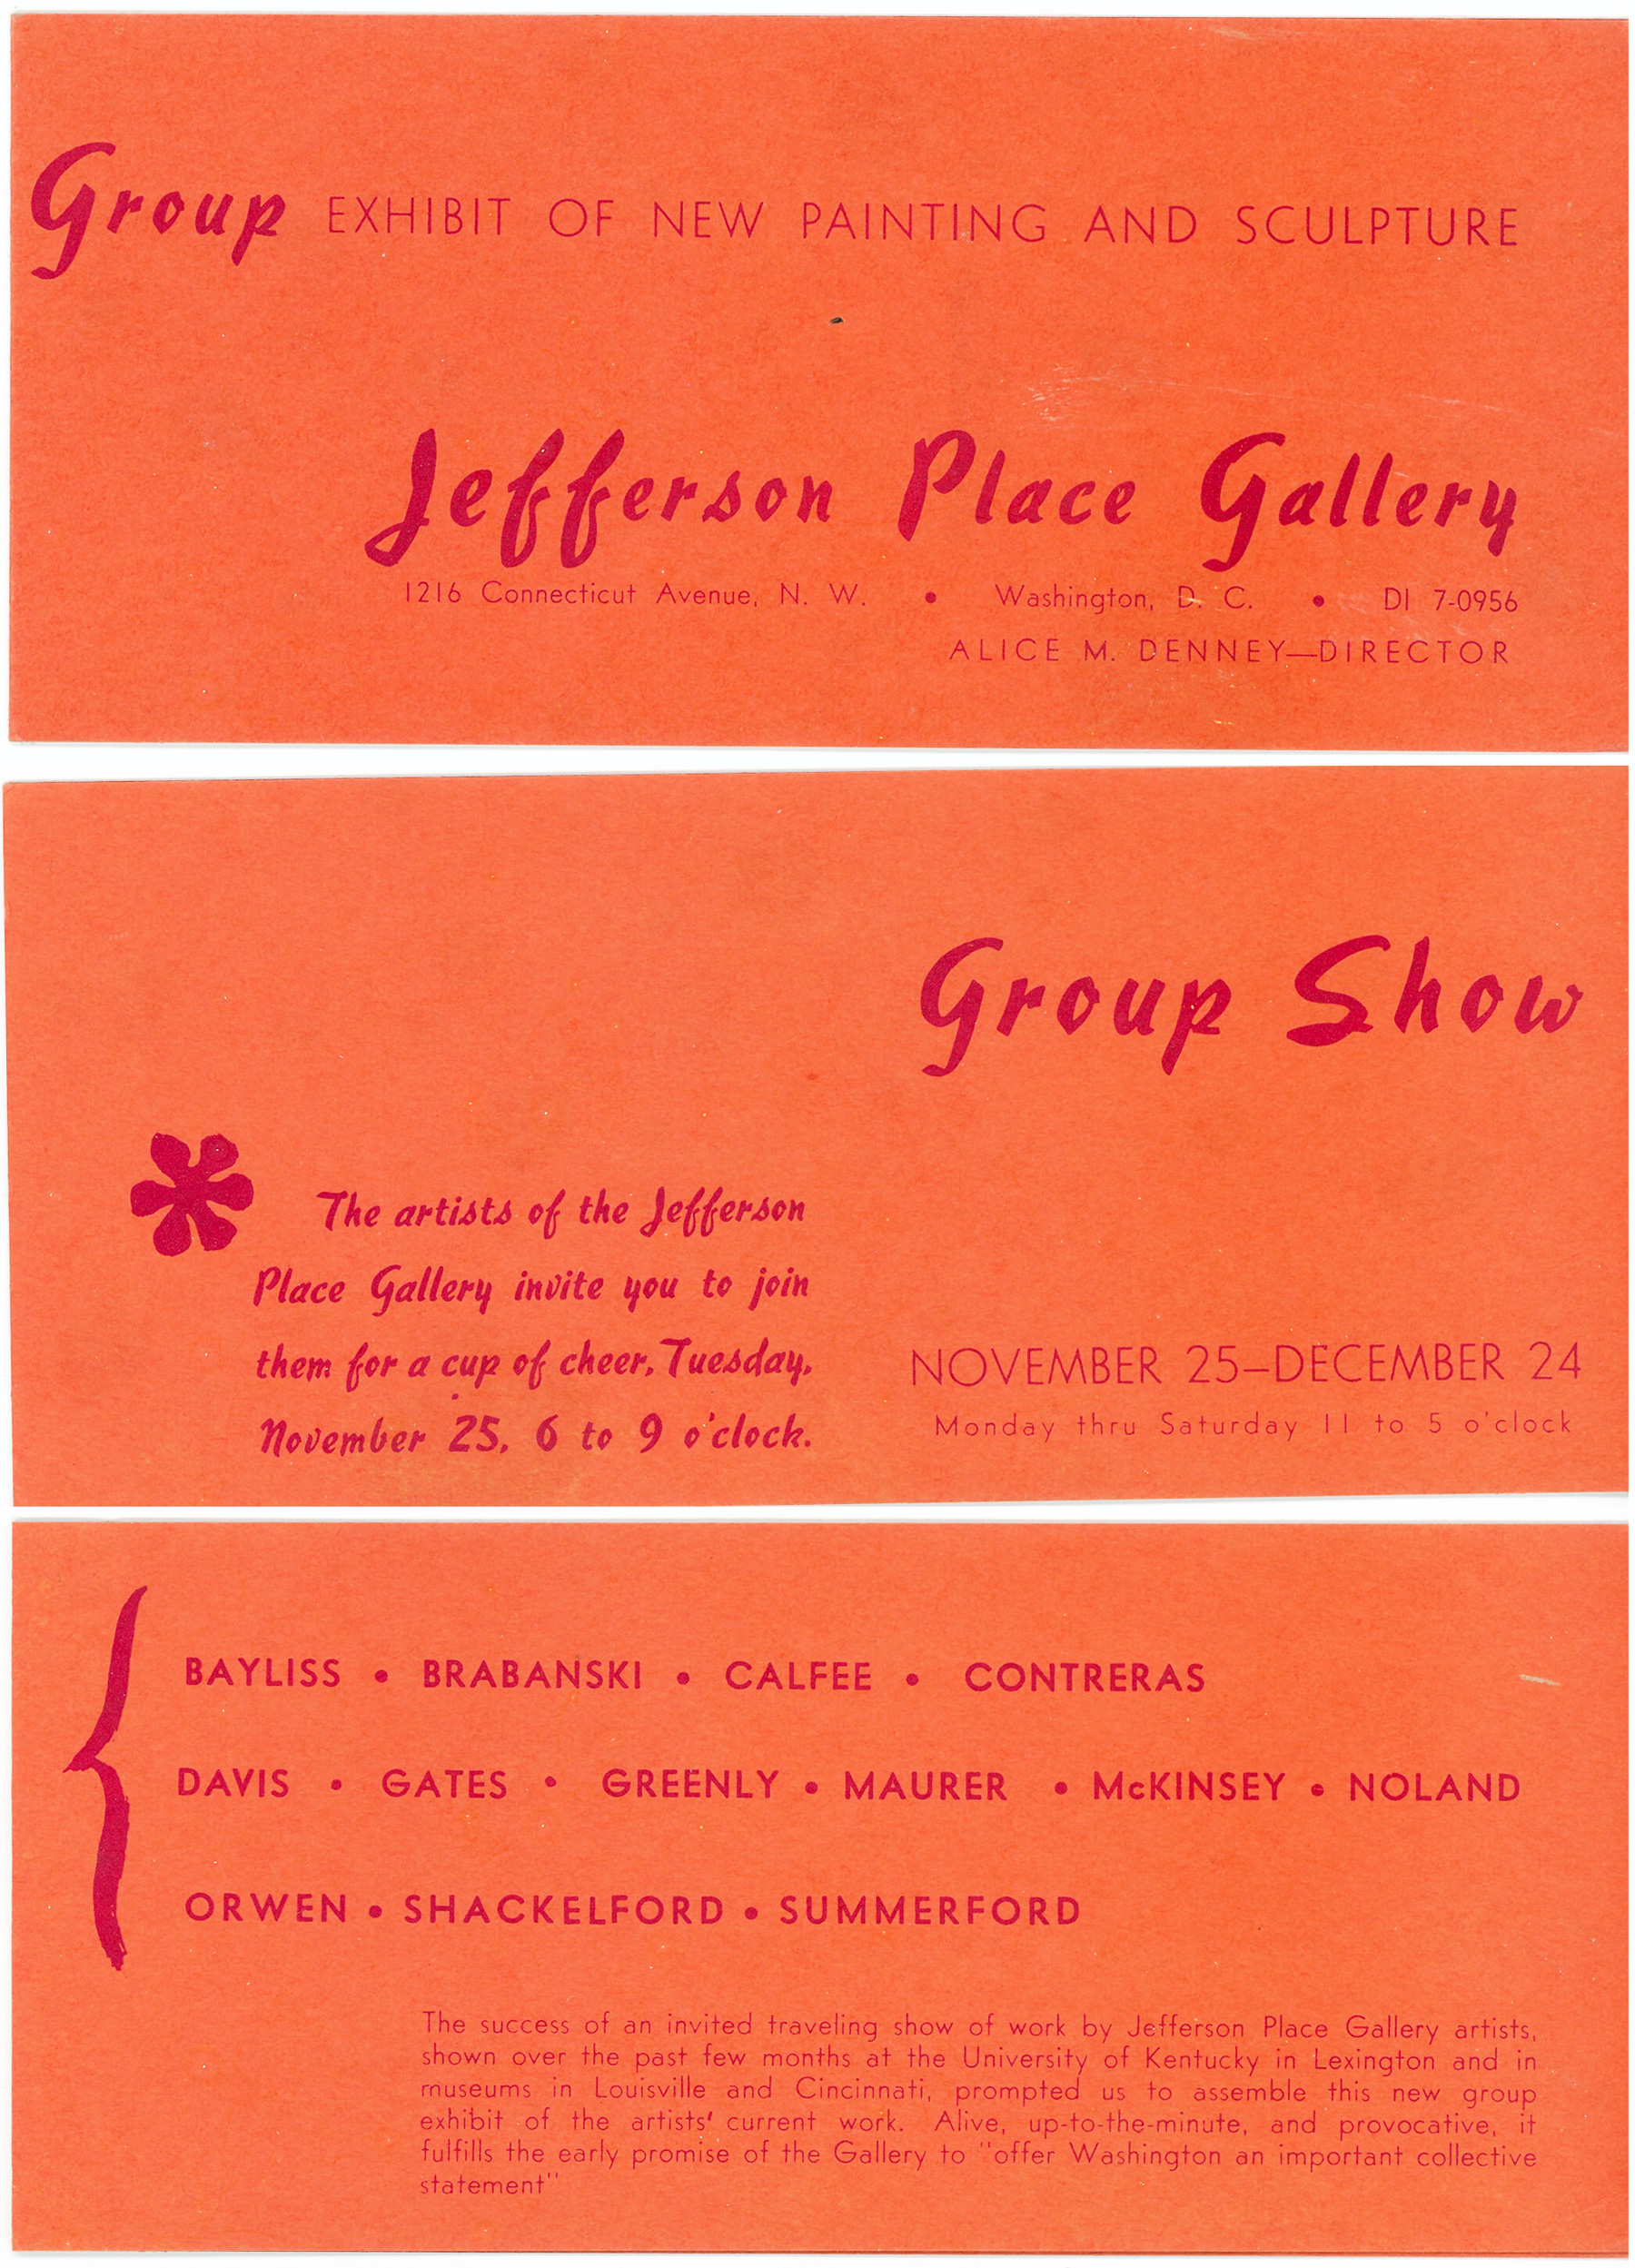 Announcement card for Group Show at Jefferson Place Gallery, 1958